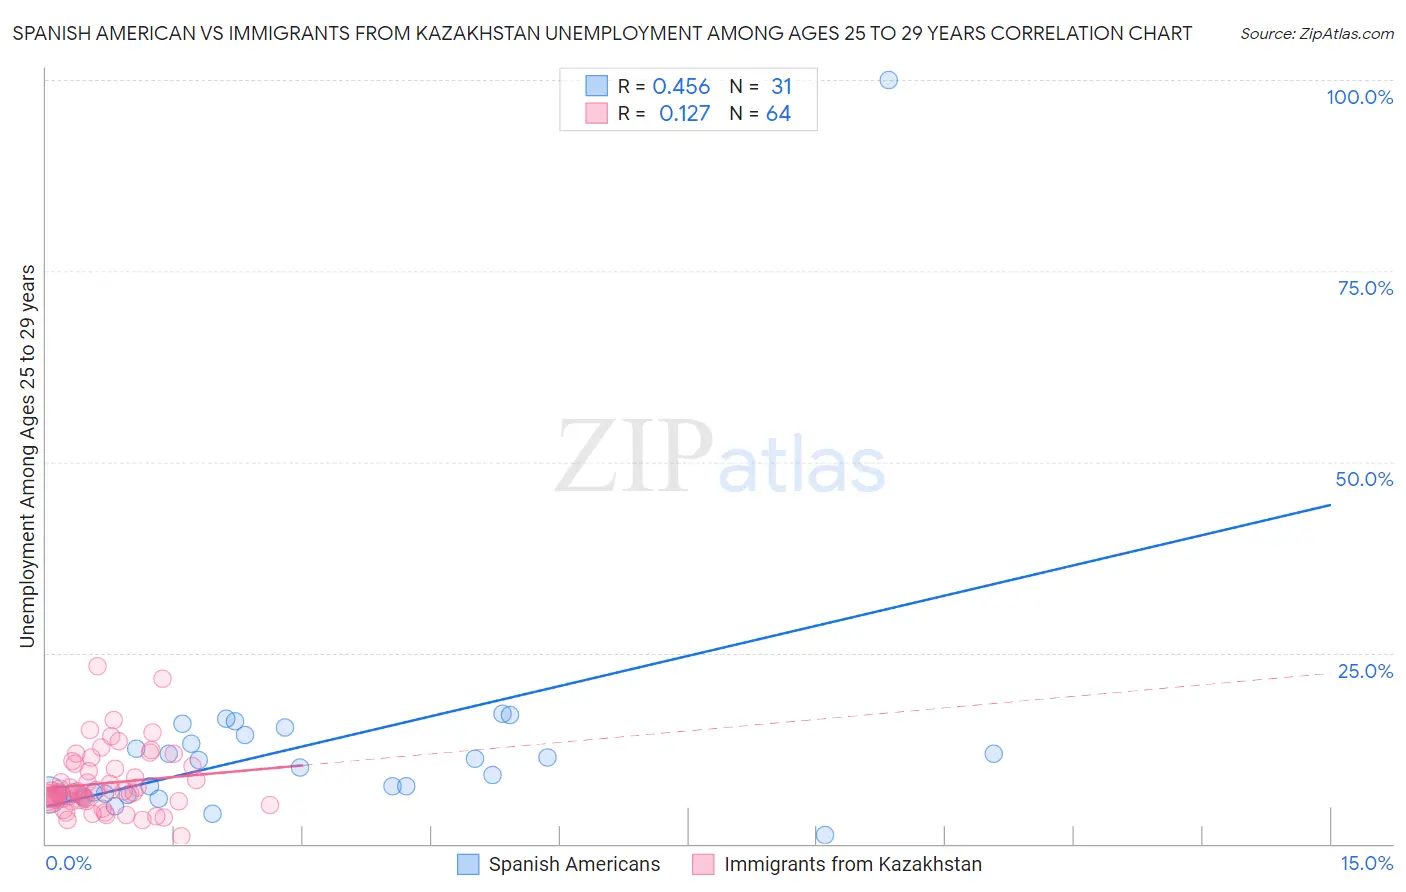 Spanish American vs Immigrants from Kazakhstan Unemployment Among Ages 25 to 29 years